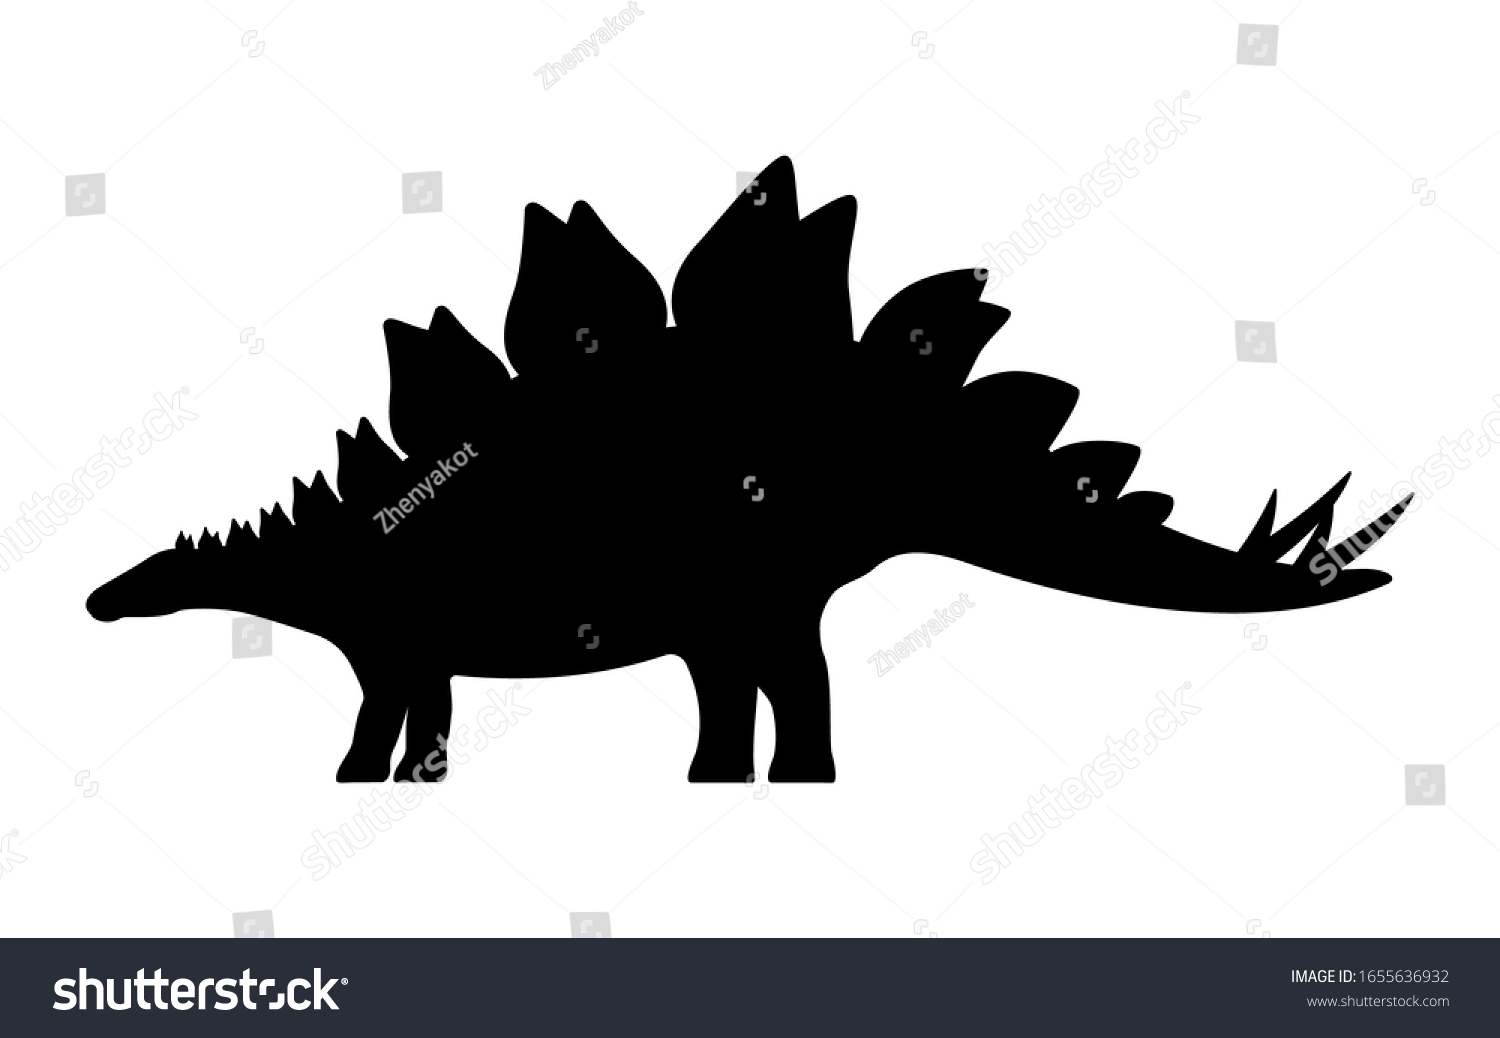 SVG of Stegosaurus silhouette. Vector illustration black silhouette of a stegosaurus dinosaur isolated on a white background. Dinosaur logo icon, side view profile. svg